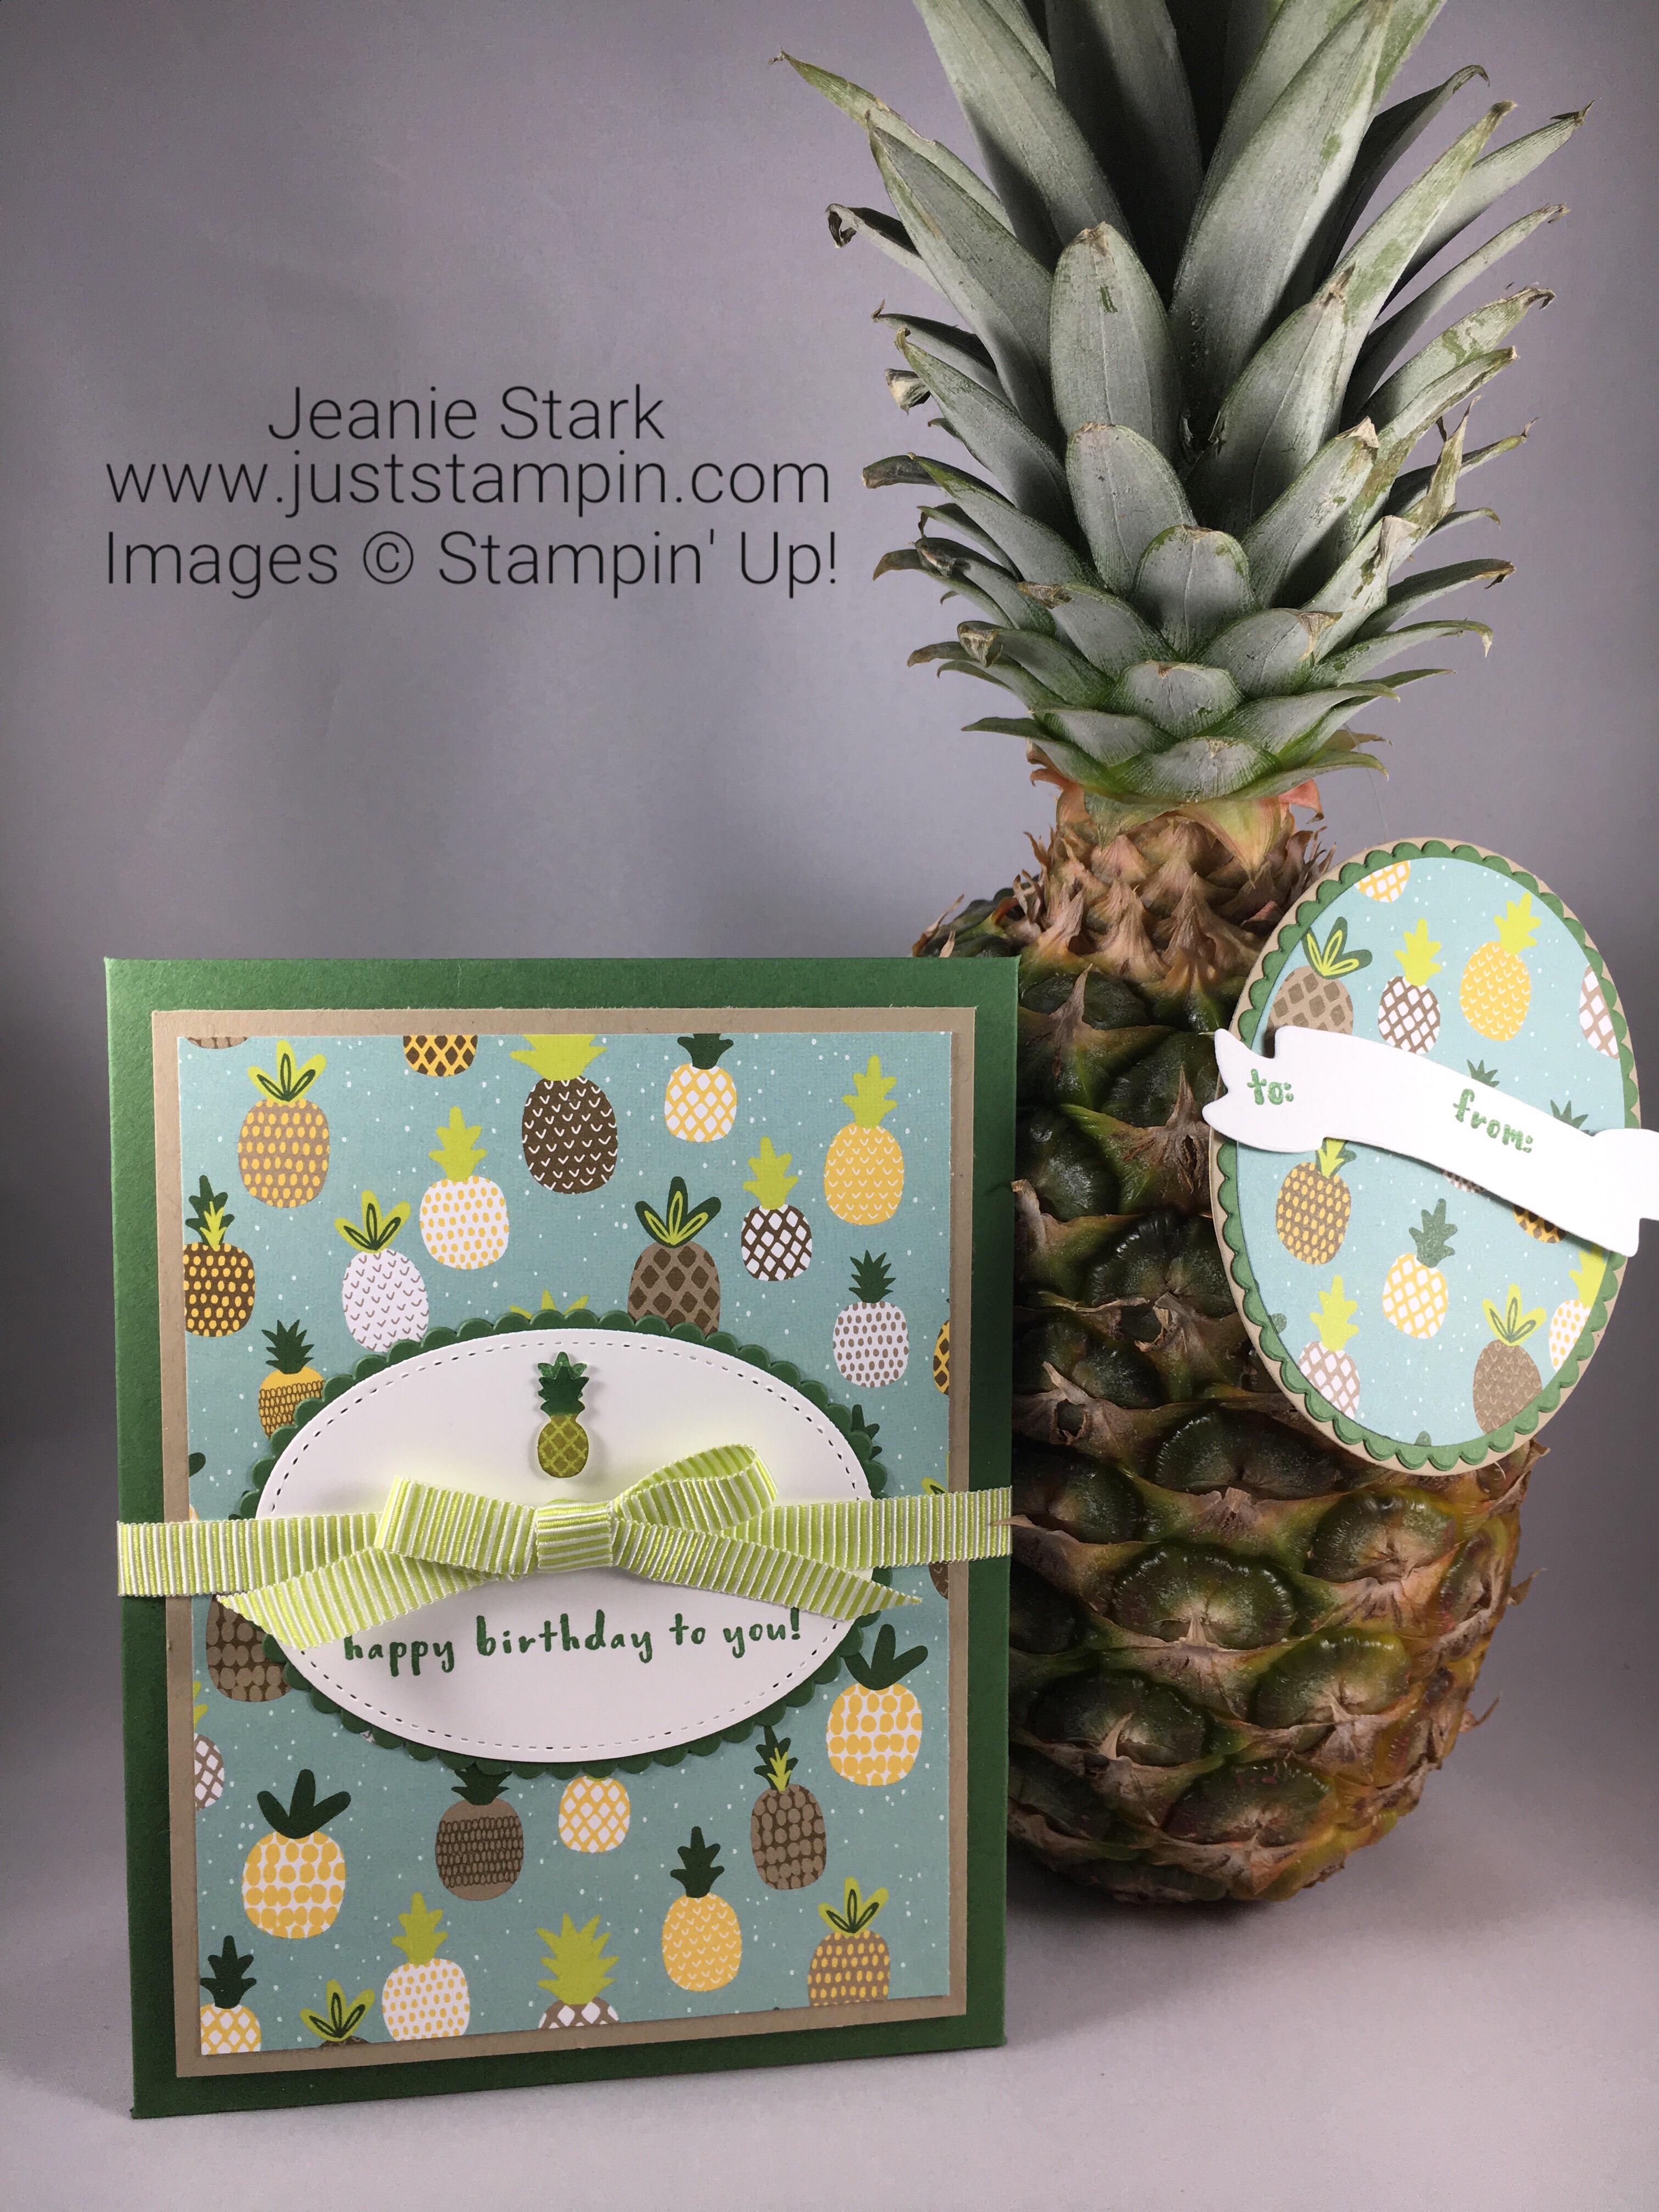 Stampin Up Envelope Punch Board and Fruit Basket Bundle birthday card and tag idea to hold a treat - Jeanie Stark StampinUp